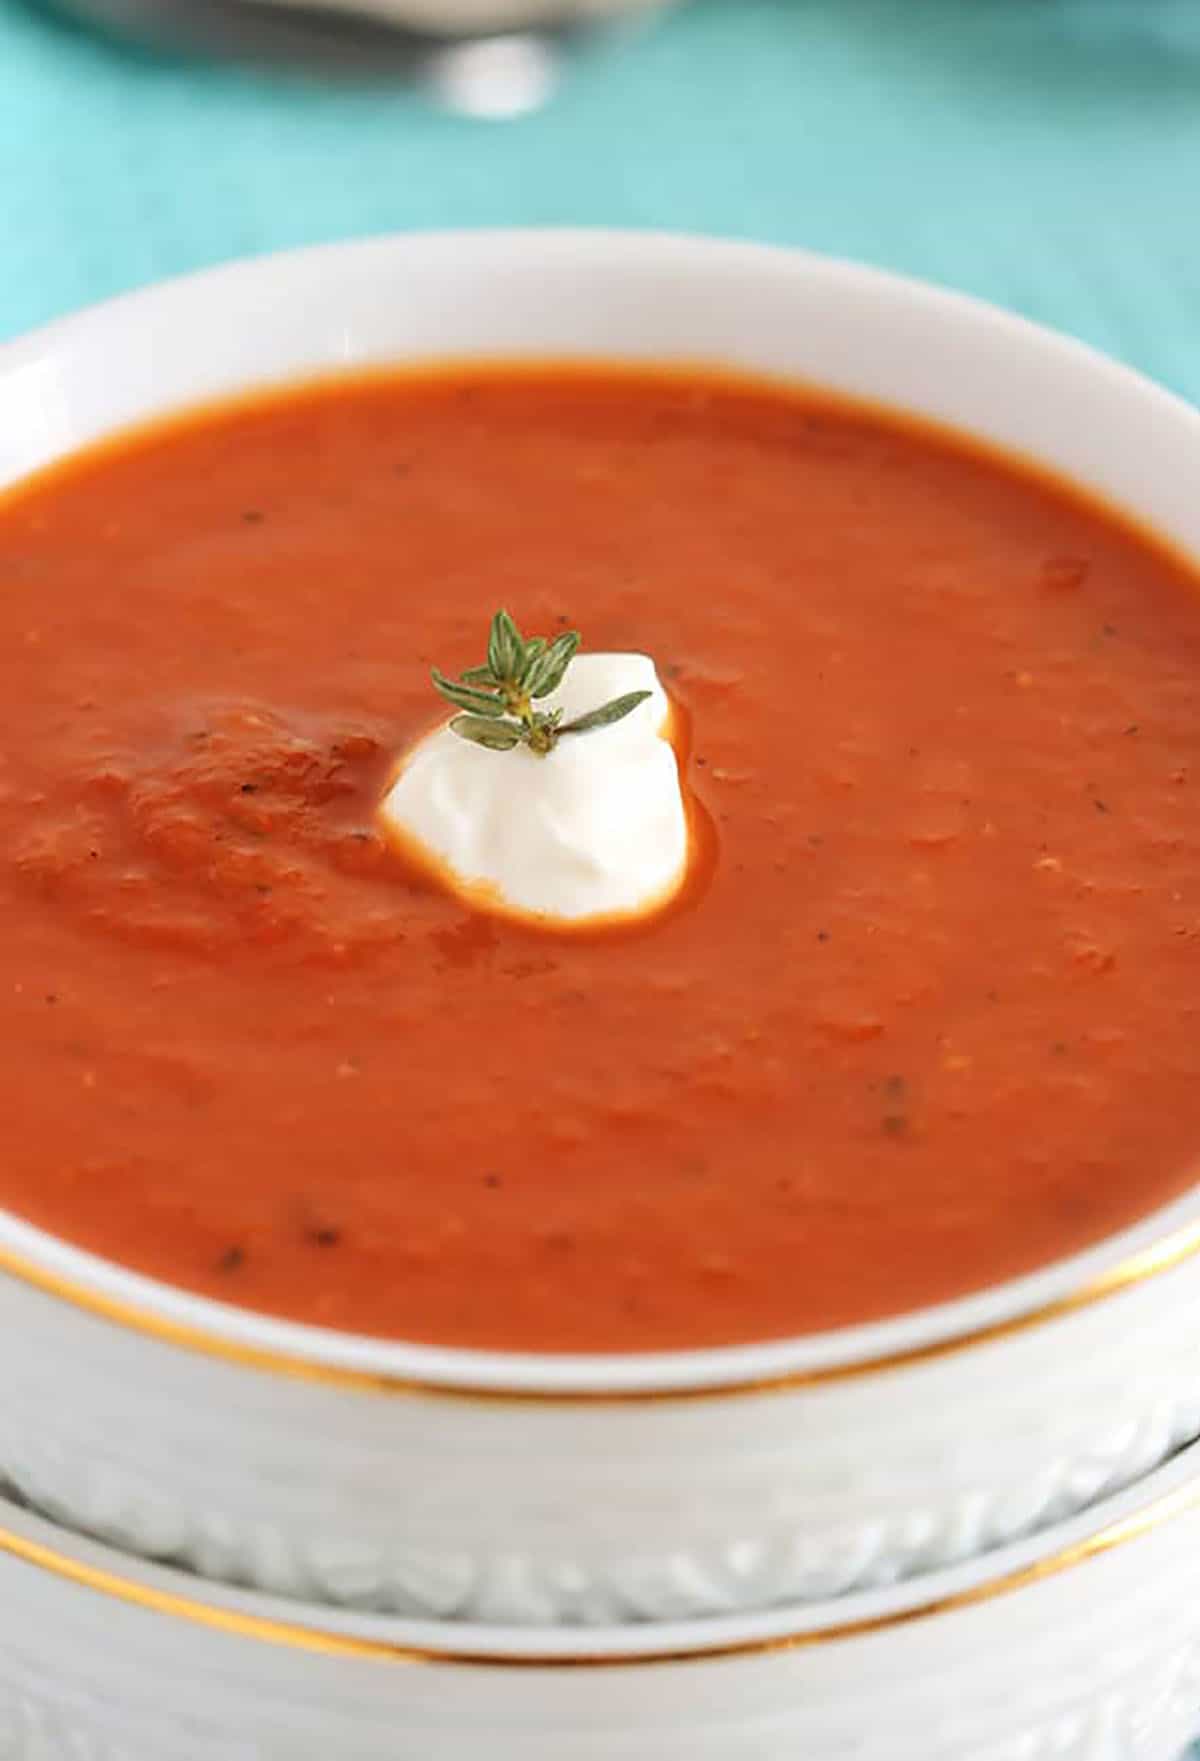 Tomato soup in a white bowl on a blue background.